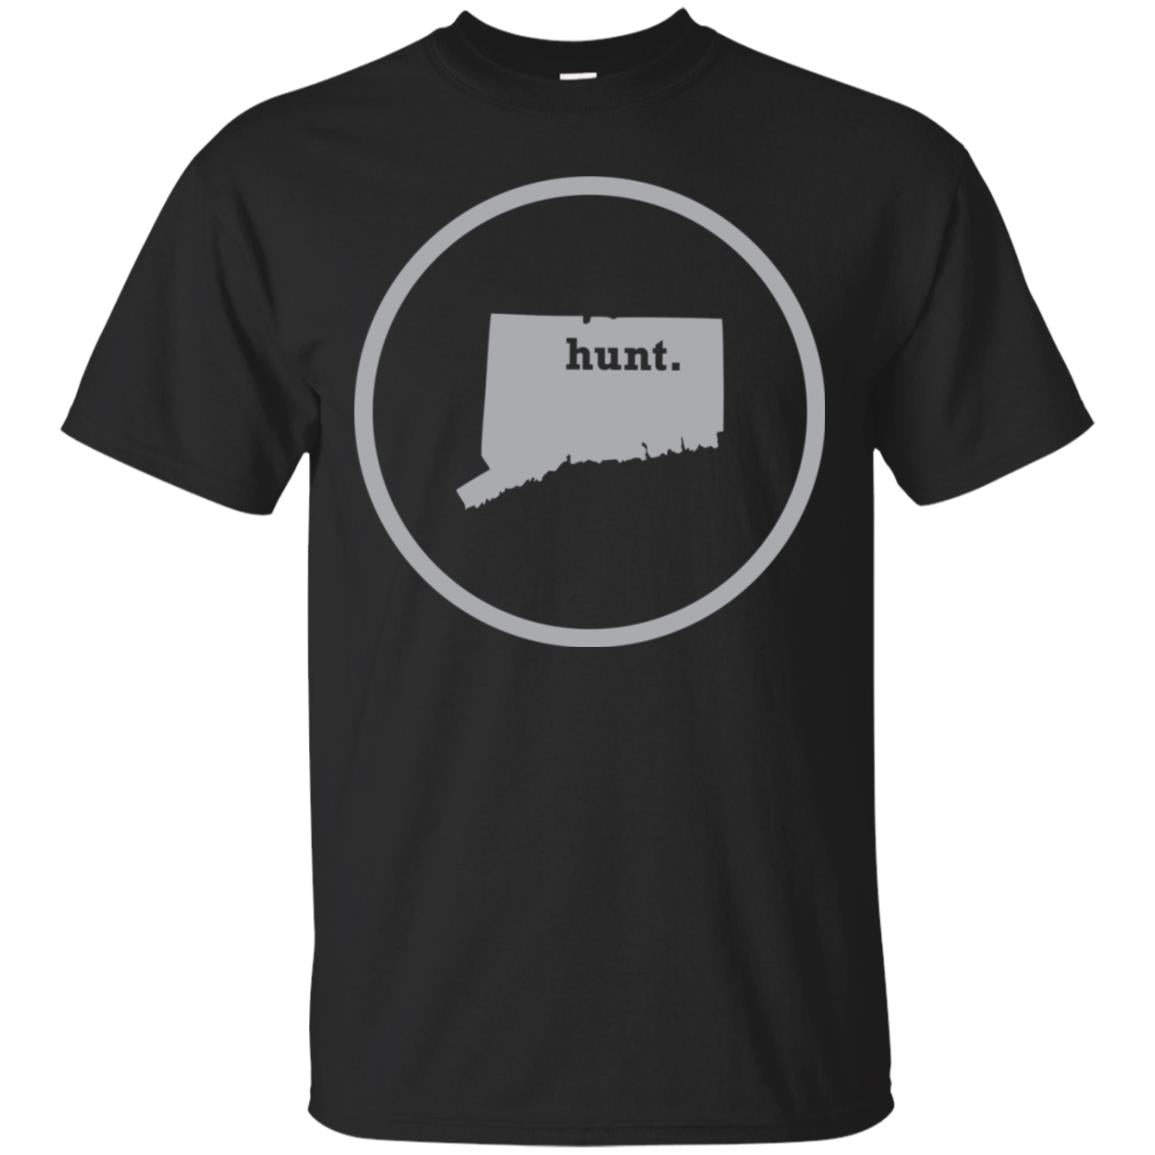 State Of Connecticut Hunter Hunting Bowhunting T Shirt